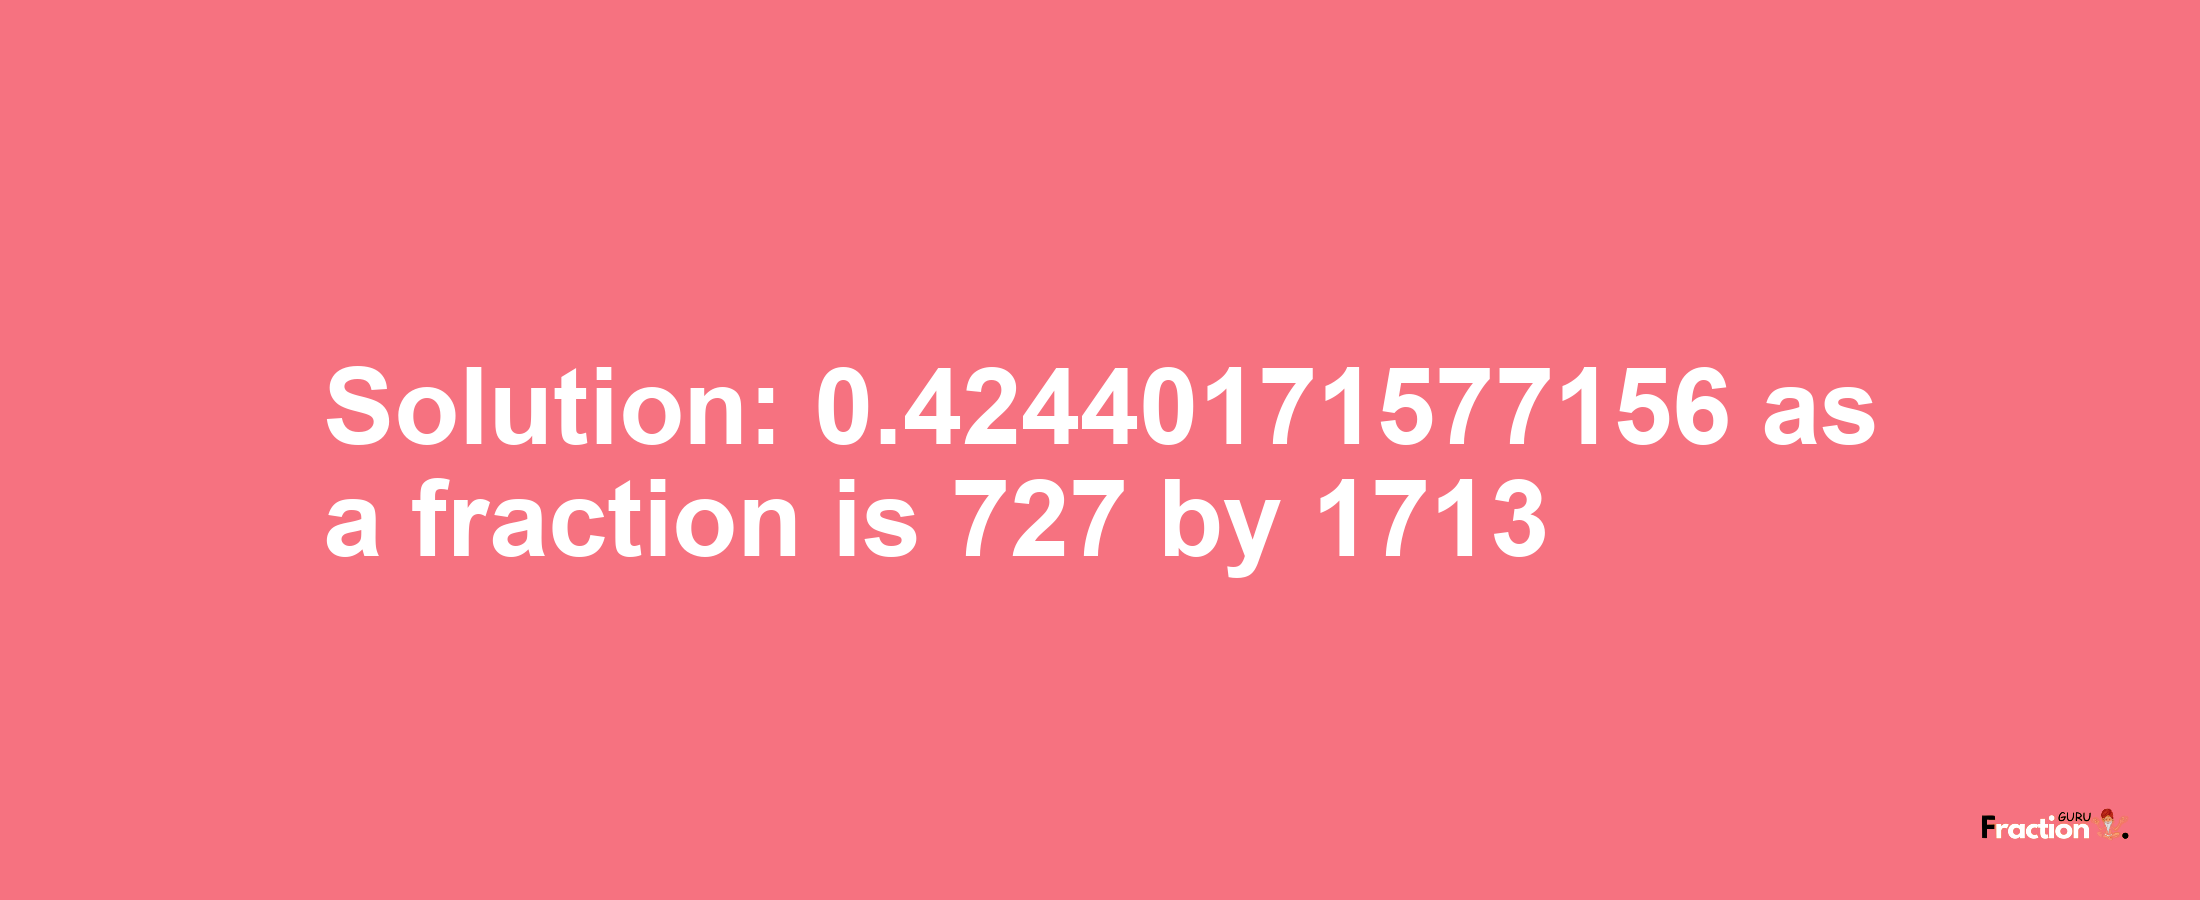 Solution:0.42440171577156 as a fraction is 727/1713